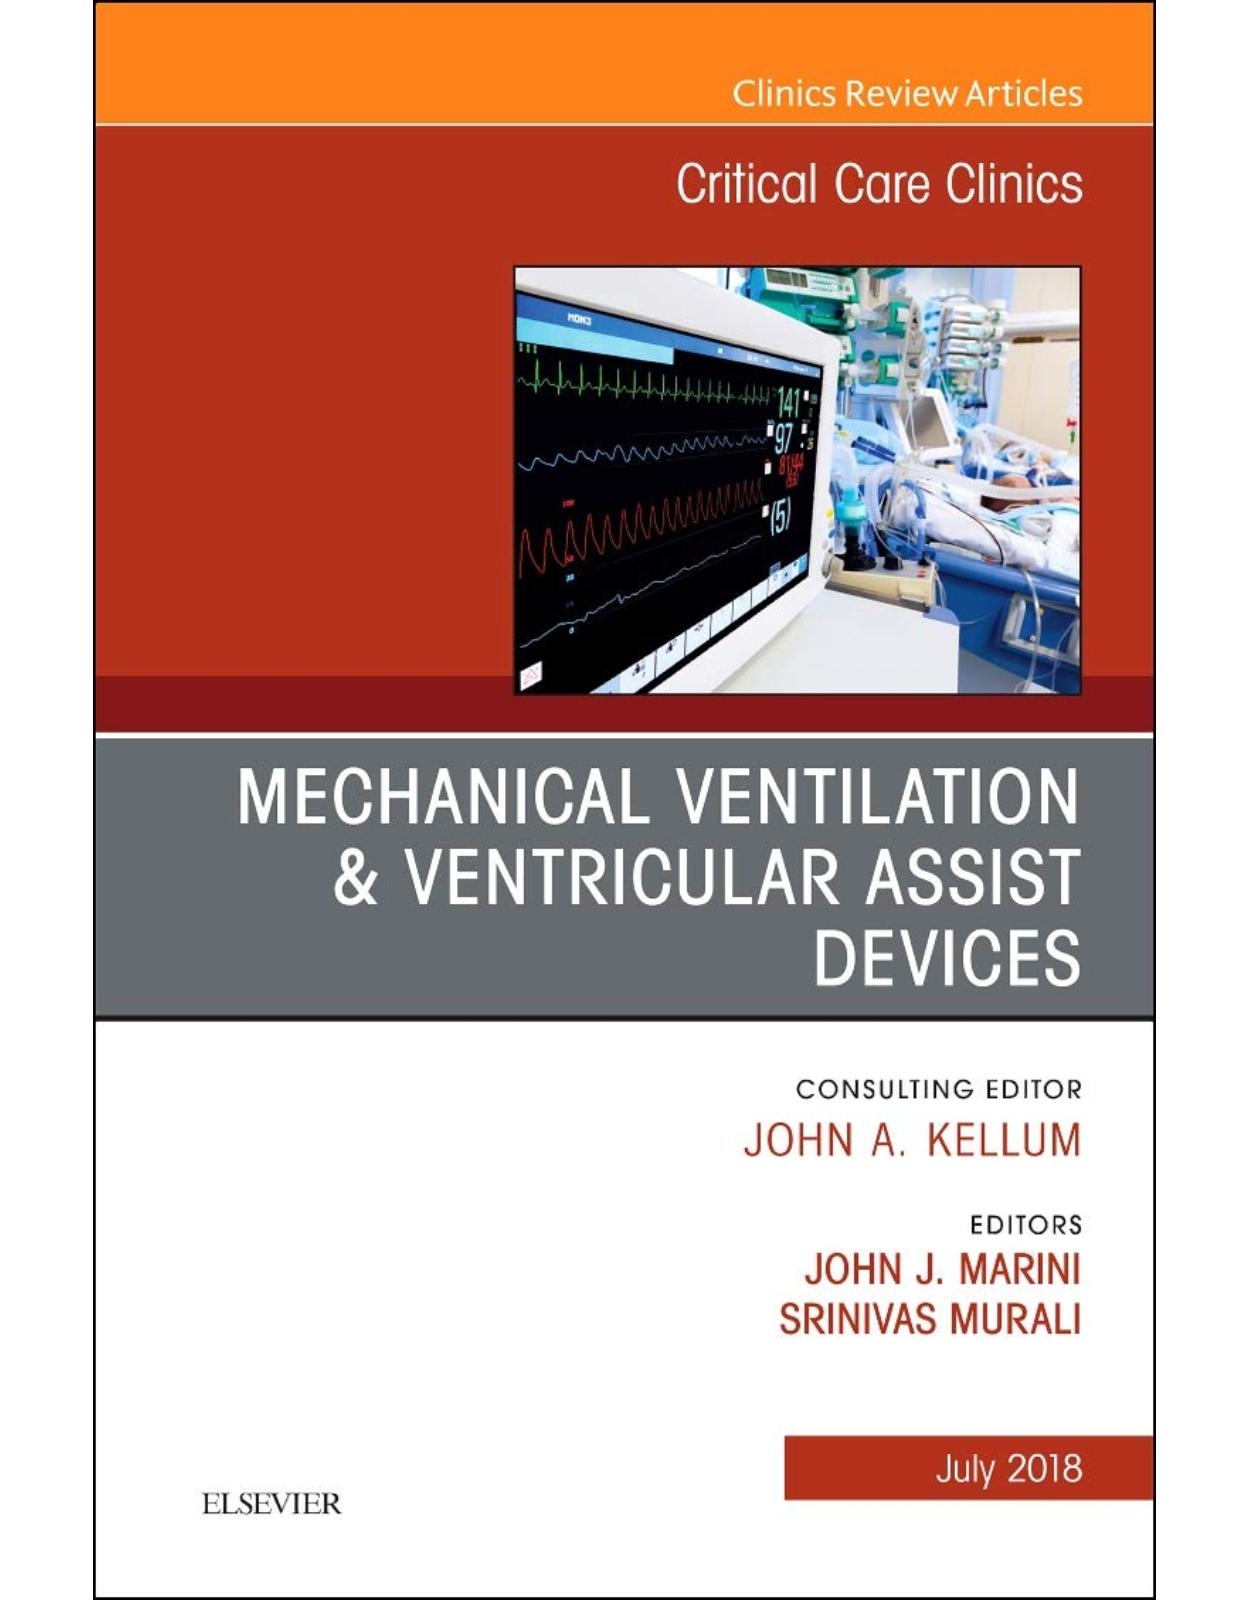 Mechanical Ventilation/Ventricular Assist Devices, An Issue of Critical Care Clinics, Volume 34-3